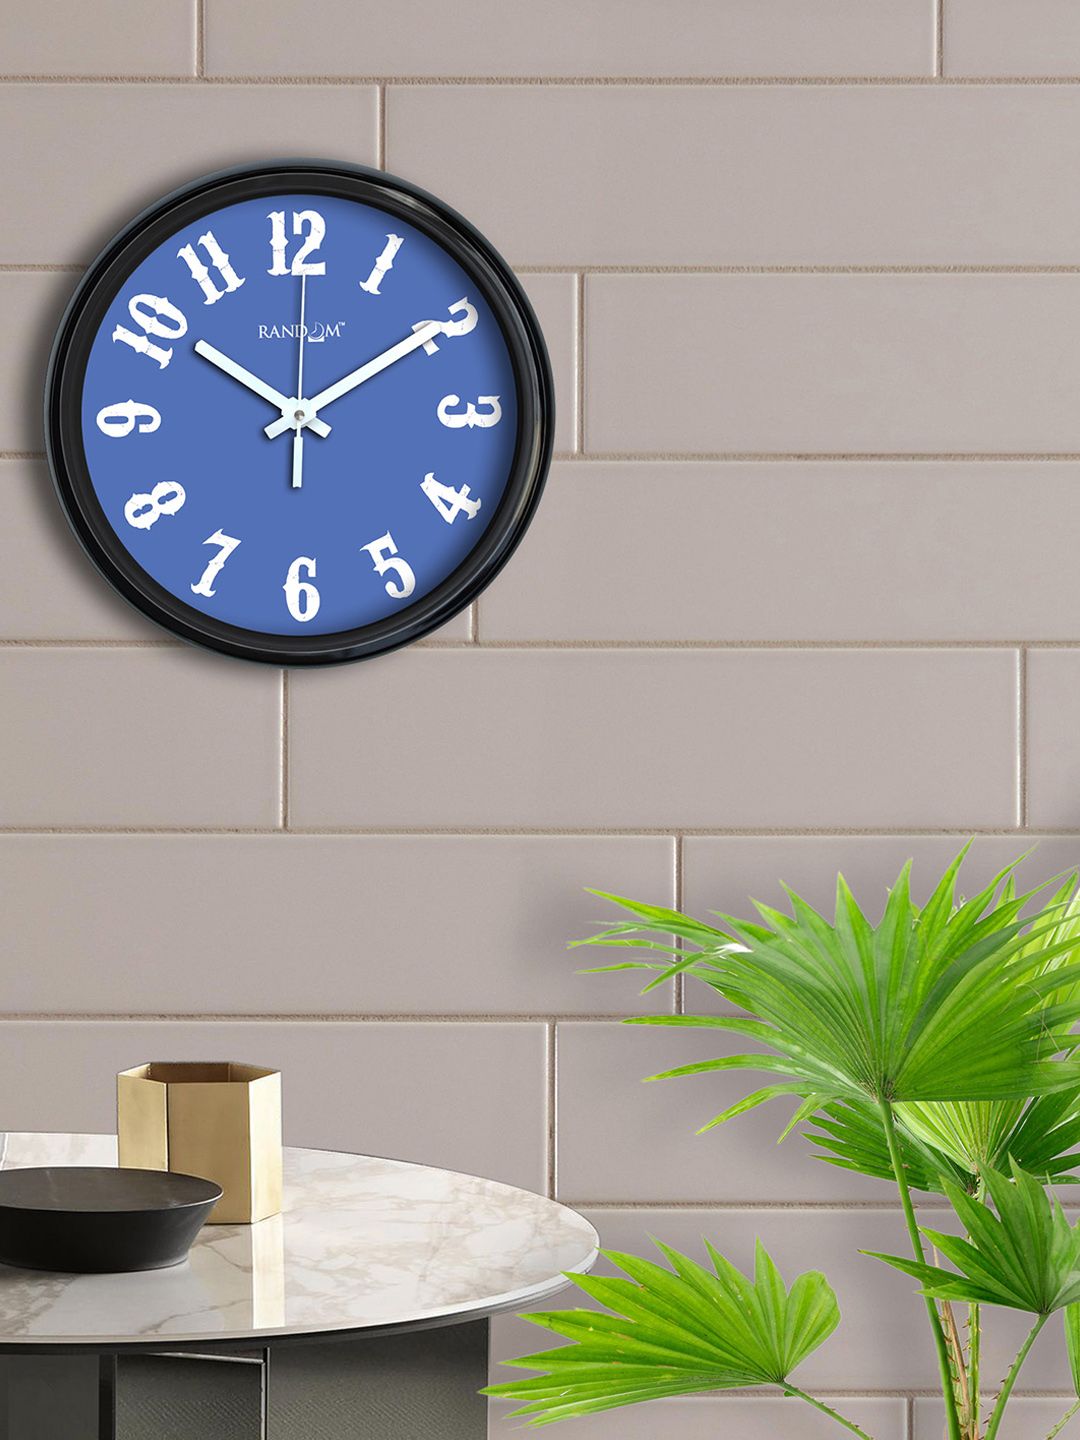 RANDOM Blue Round Solid 30.48 cm Analogue Wall Clock Price in India